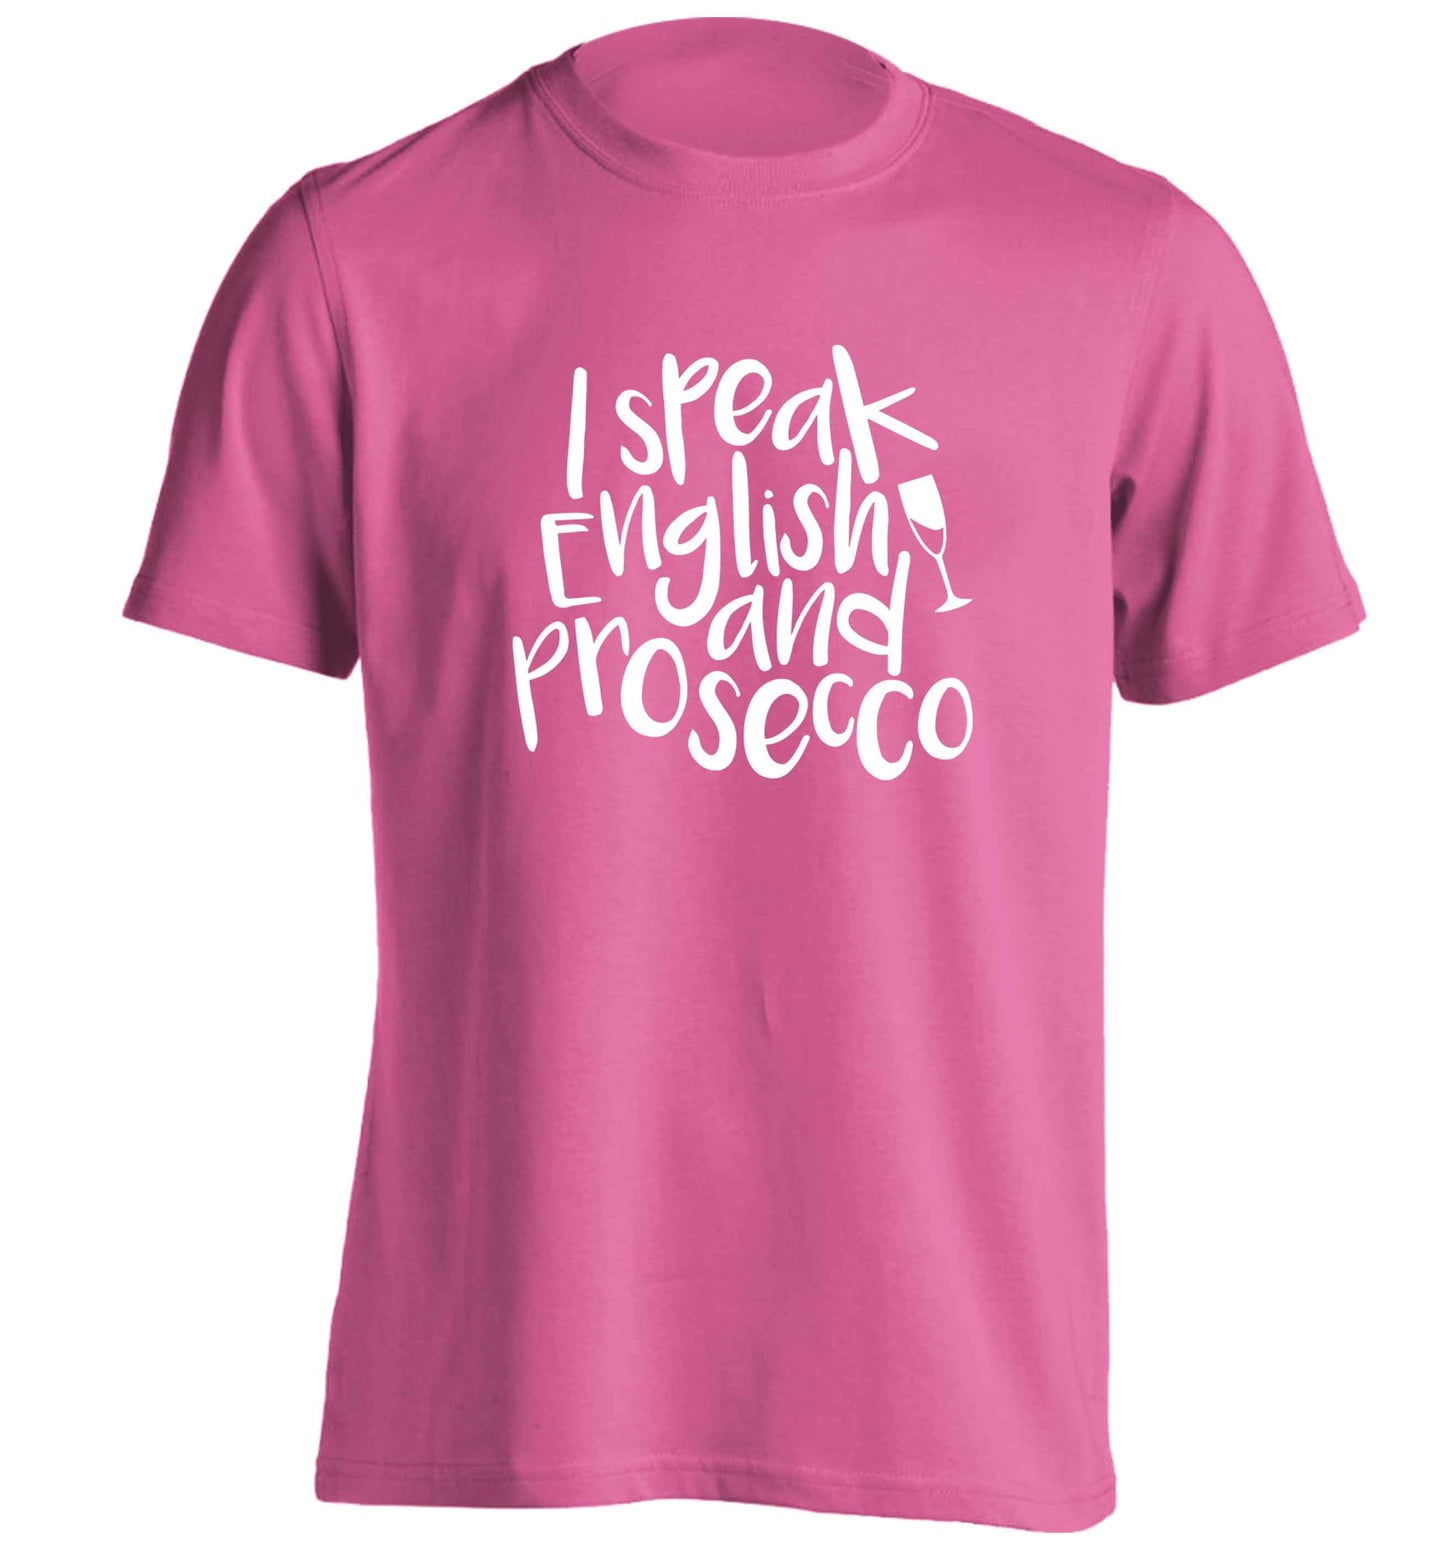 I speak English and prosecco adults unisex pink Tshirt 2XL